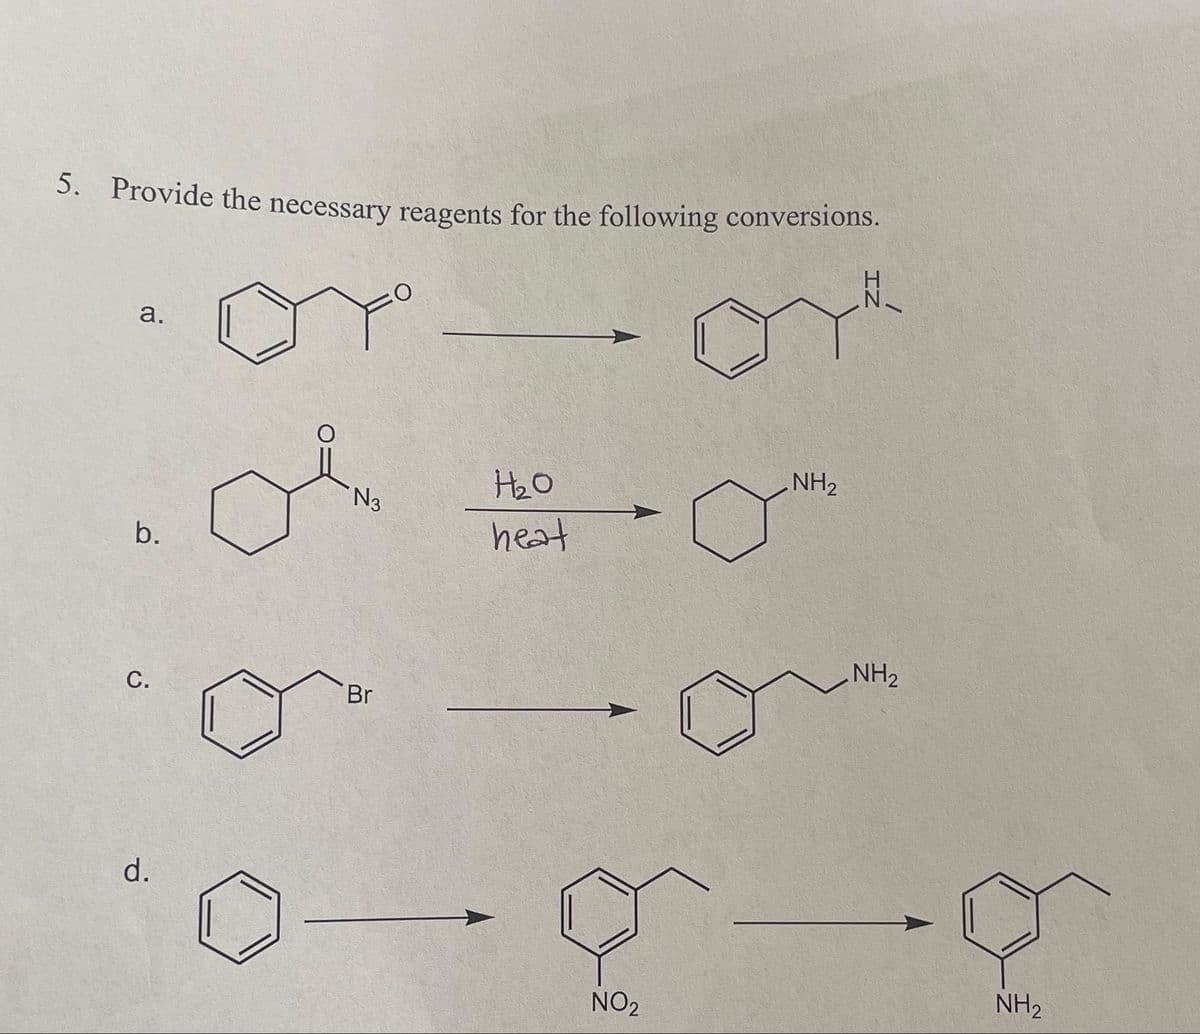 5. Provide the necessary reagents for the following conversions.
N
a.
b.
C.
d.
N3
Br
H₂O
heat
NH₂
NO₂
NH₂
0-0
NH₂